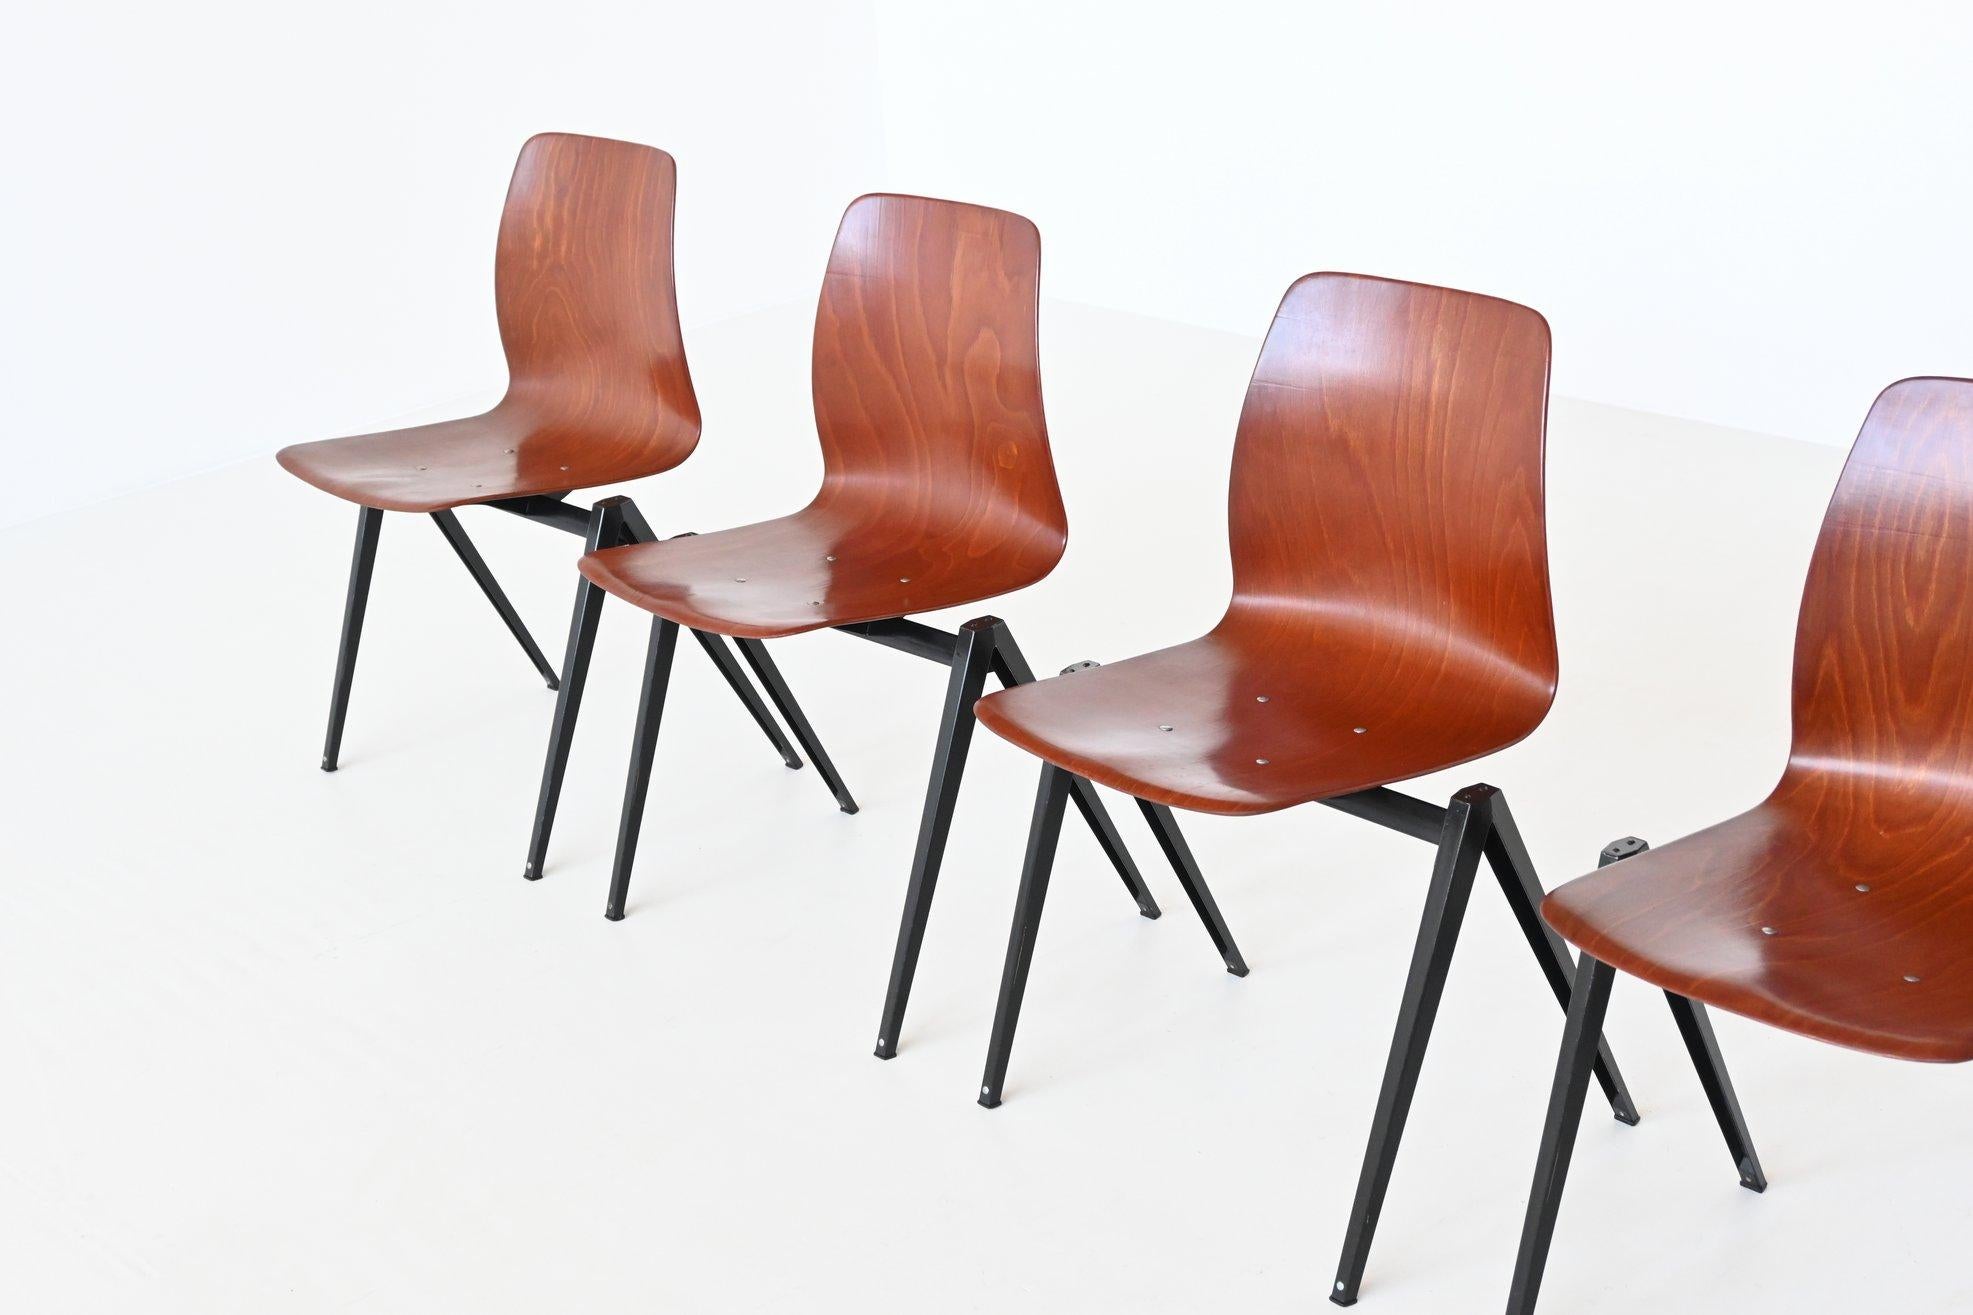 Lacquered Elmar Flototto S22 Stacking Chairs Pagholz, Germany, 1970